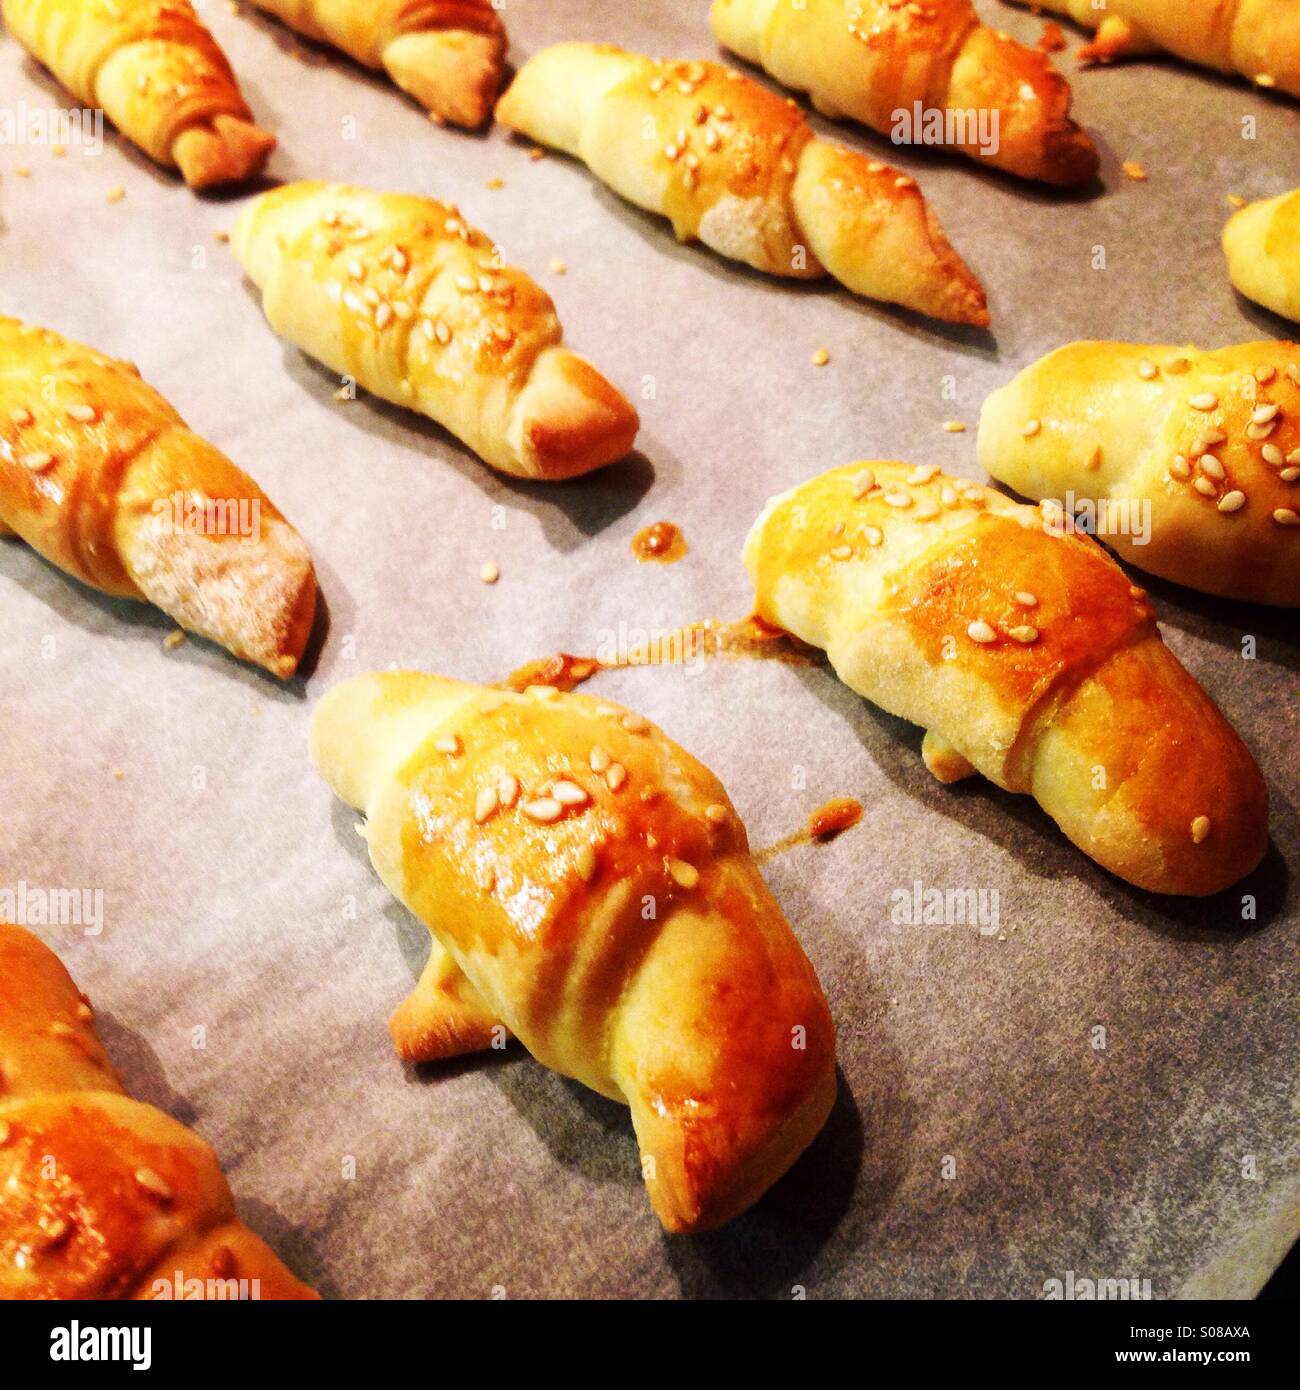 Fresh baked pastry rolls close up Stock Photo